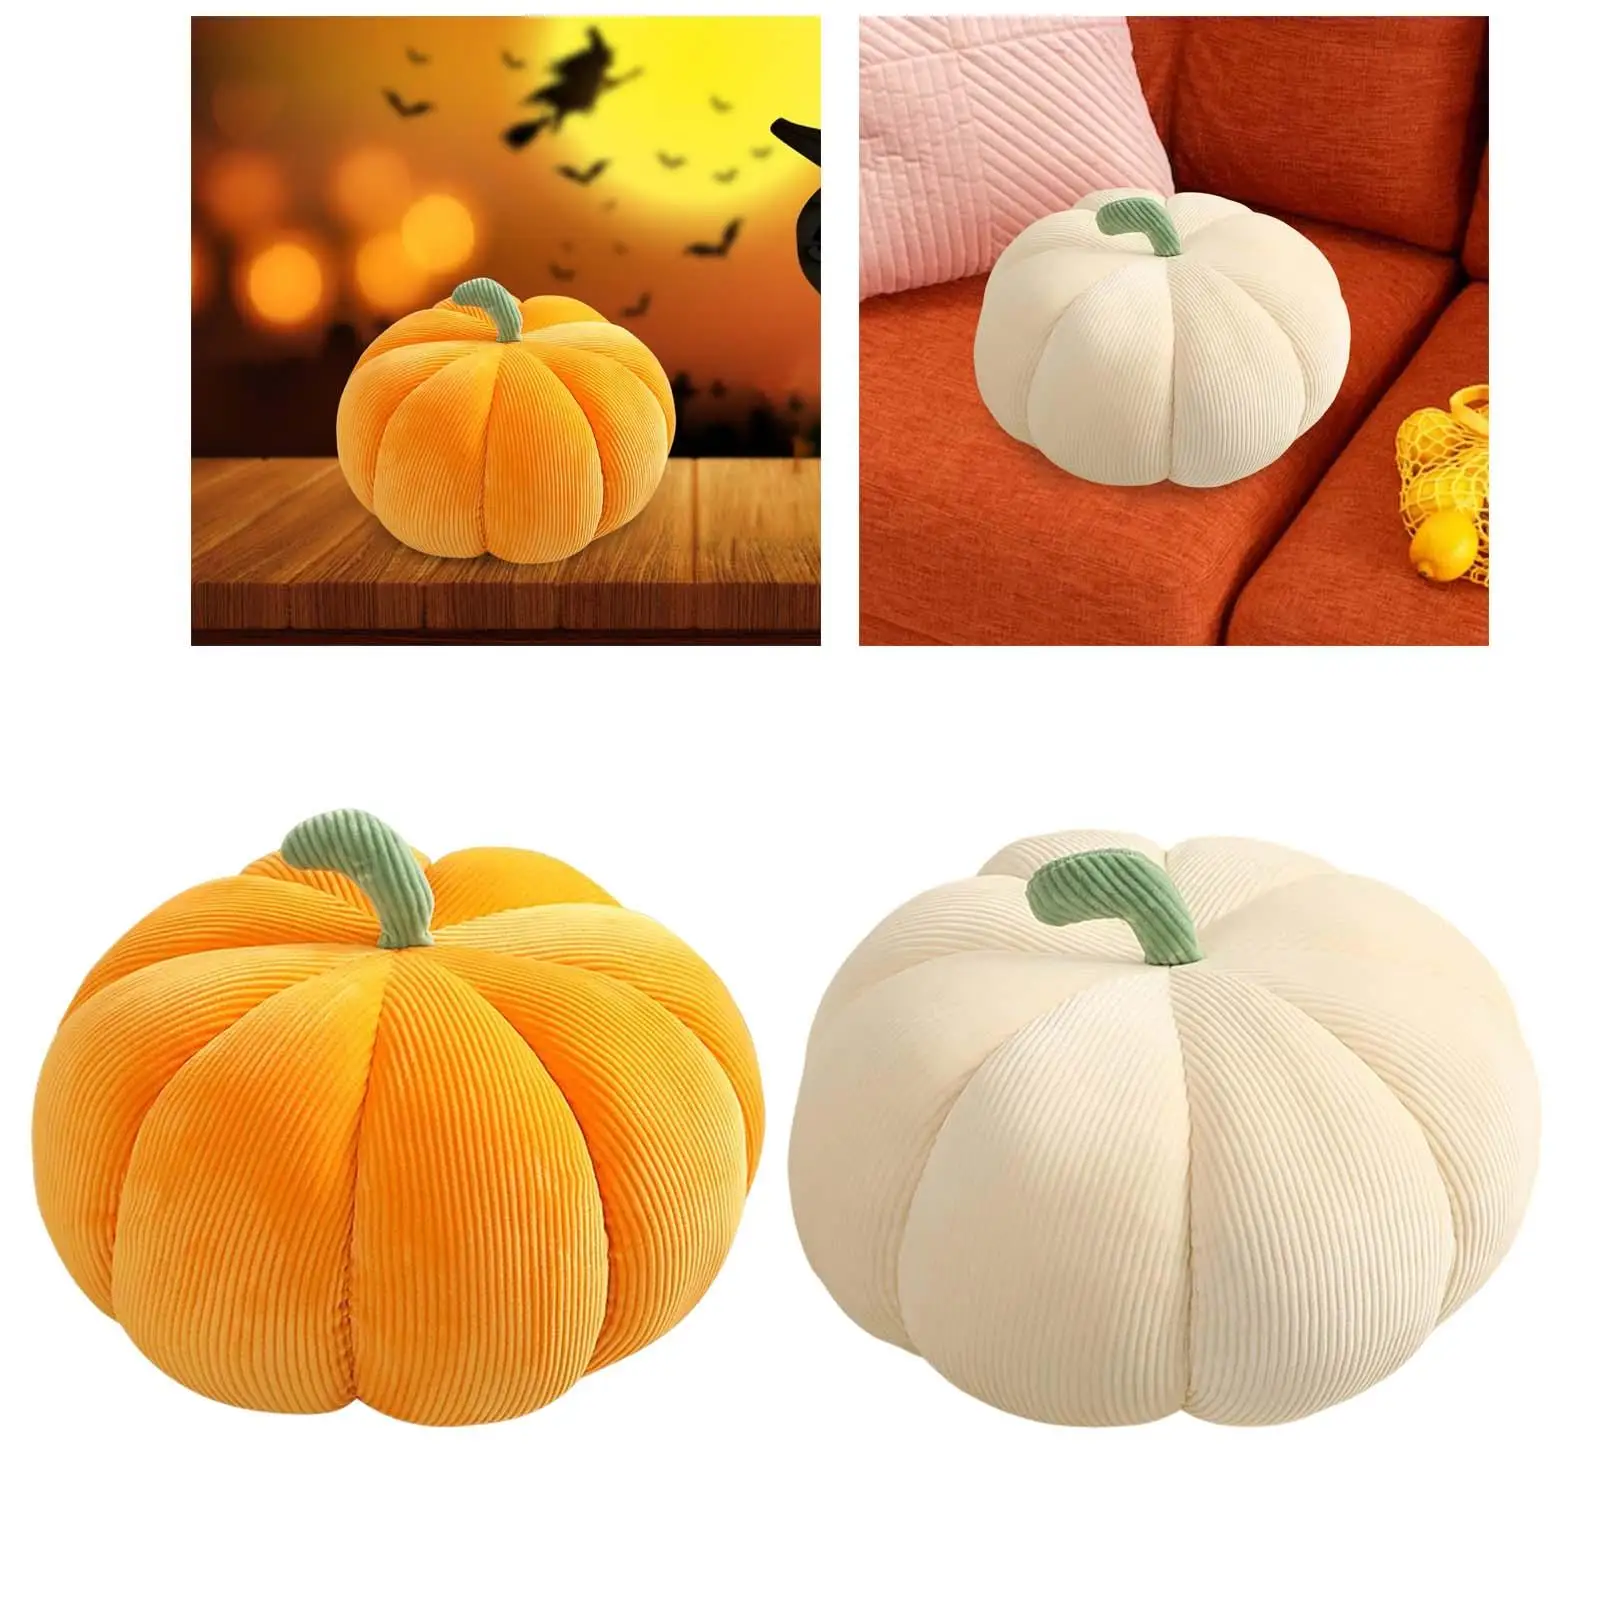 Stuffed Pumpkin Throw Pillow/ Decorative Autumn Decoration Soft Couch Throw Pillow Toy/ for Photography Props Bedroom/